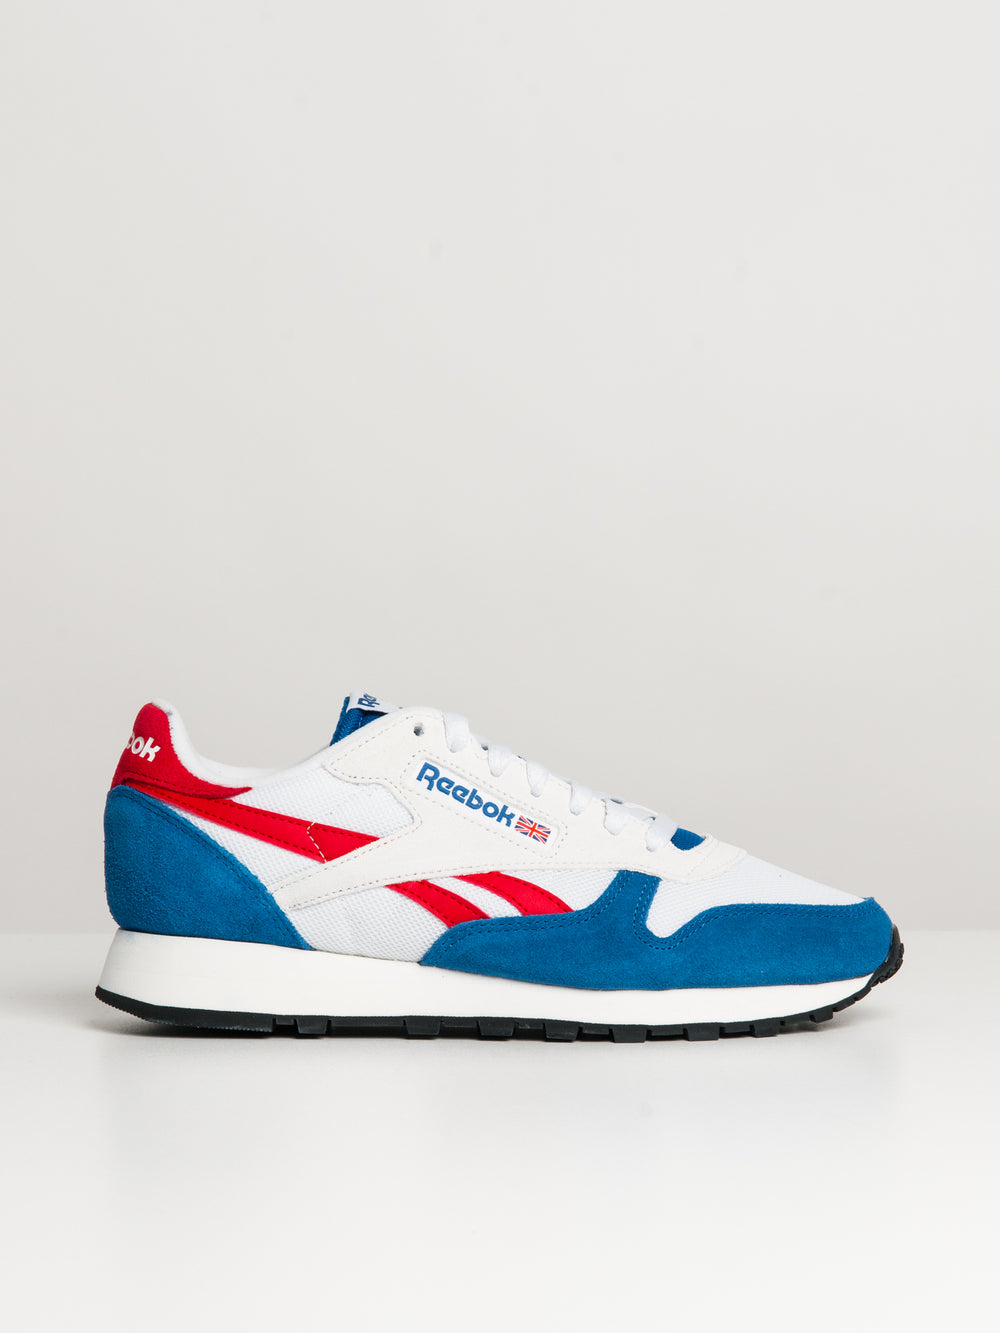 MENS REEBOK CLASSIC LEATHER SNEAKER - CLEARANCE